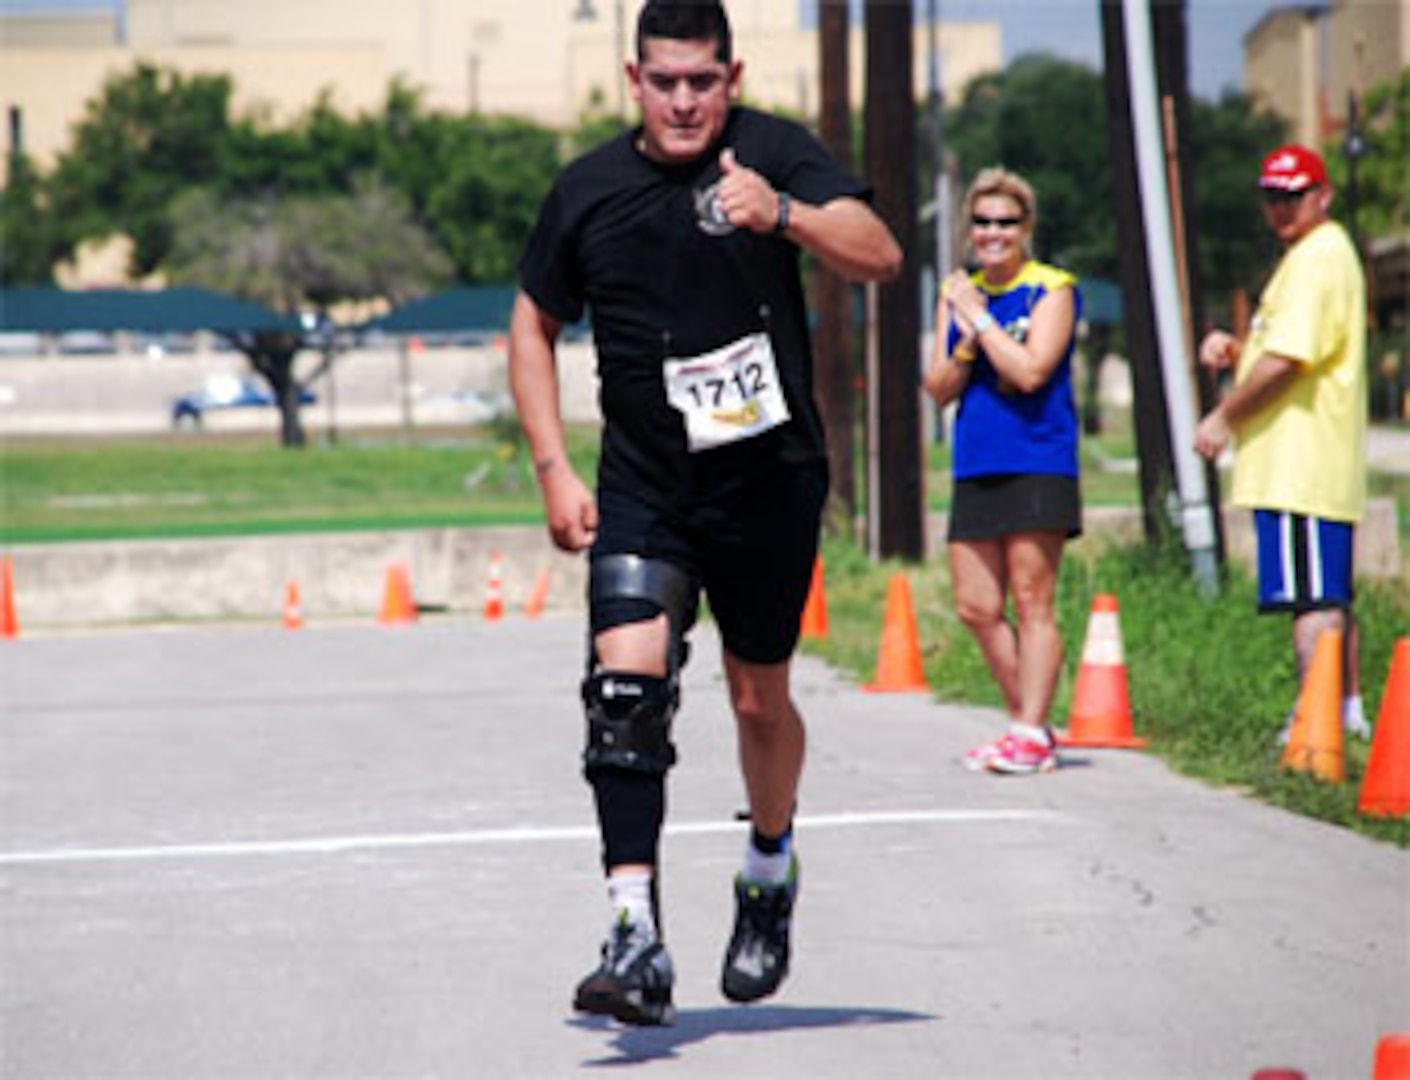 Marine Staff Sgt. Mark Juarez completes a 2-mile run/walk in the Mini-Try held at Joint Base San Antonio Fort Sam Houston May 18.  (Photo by Maria Gallegos)